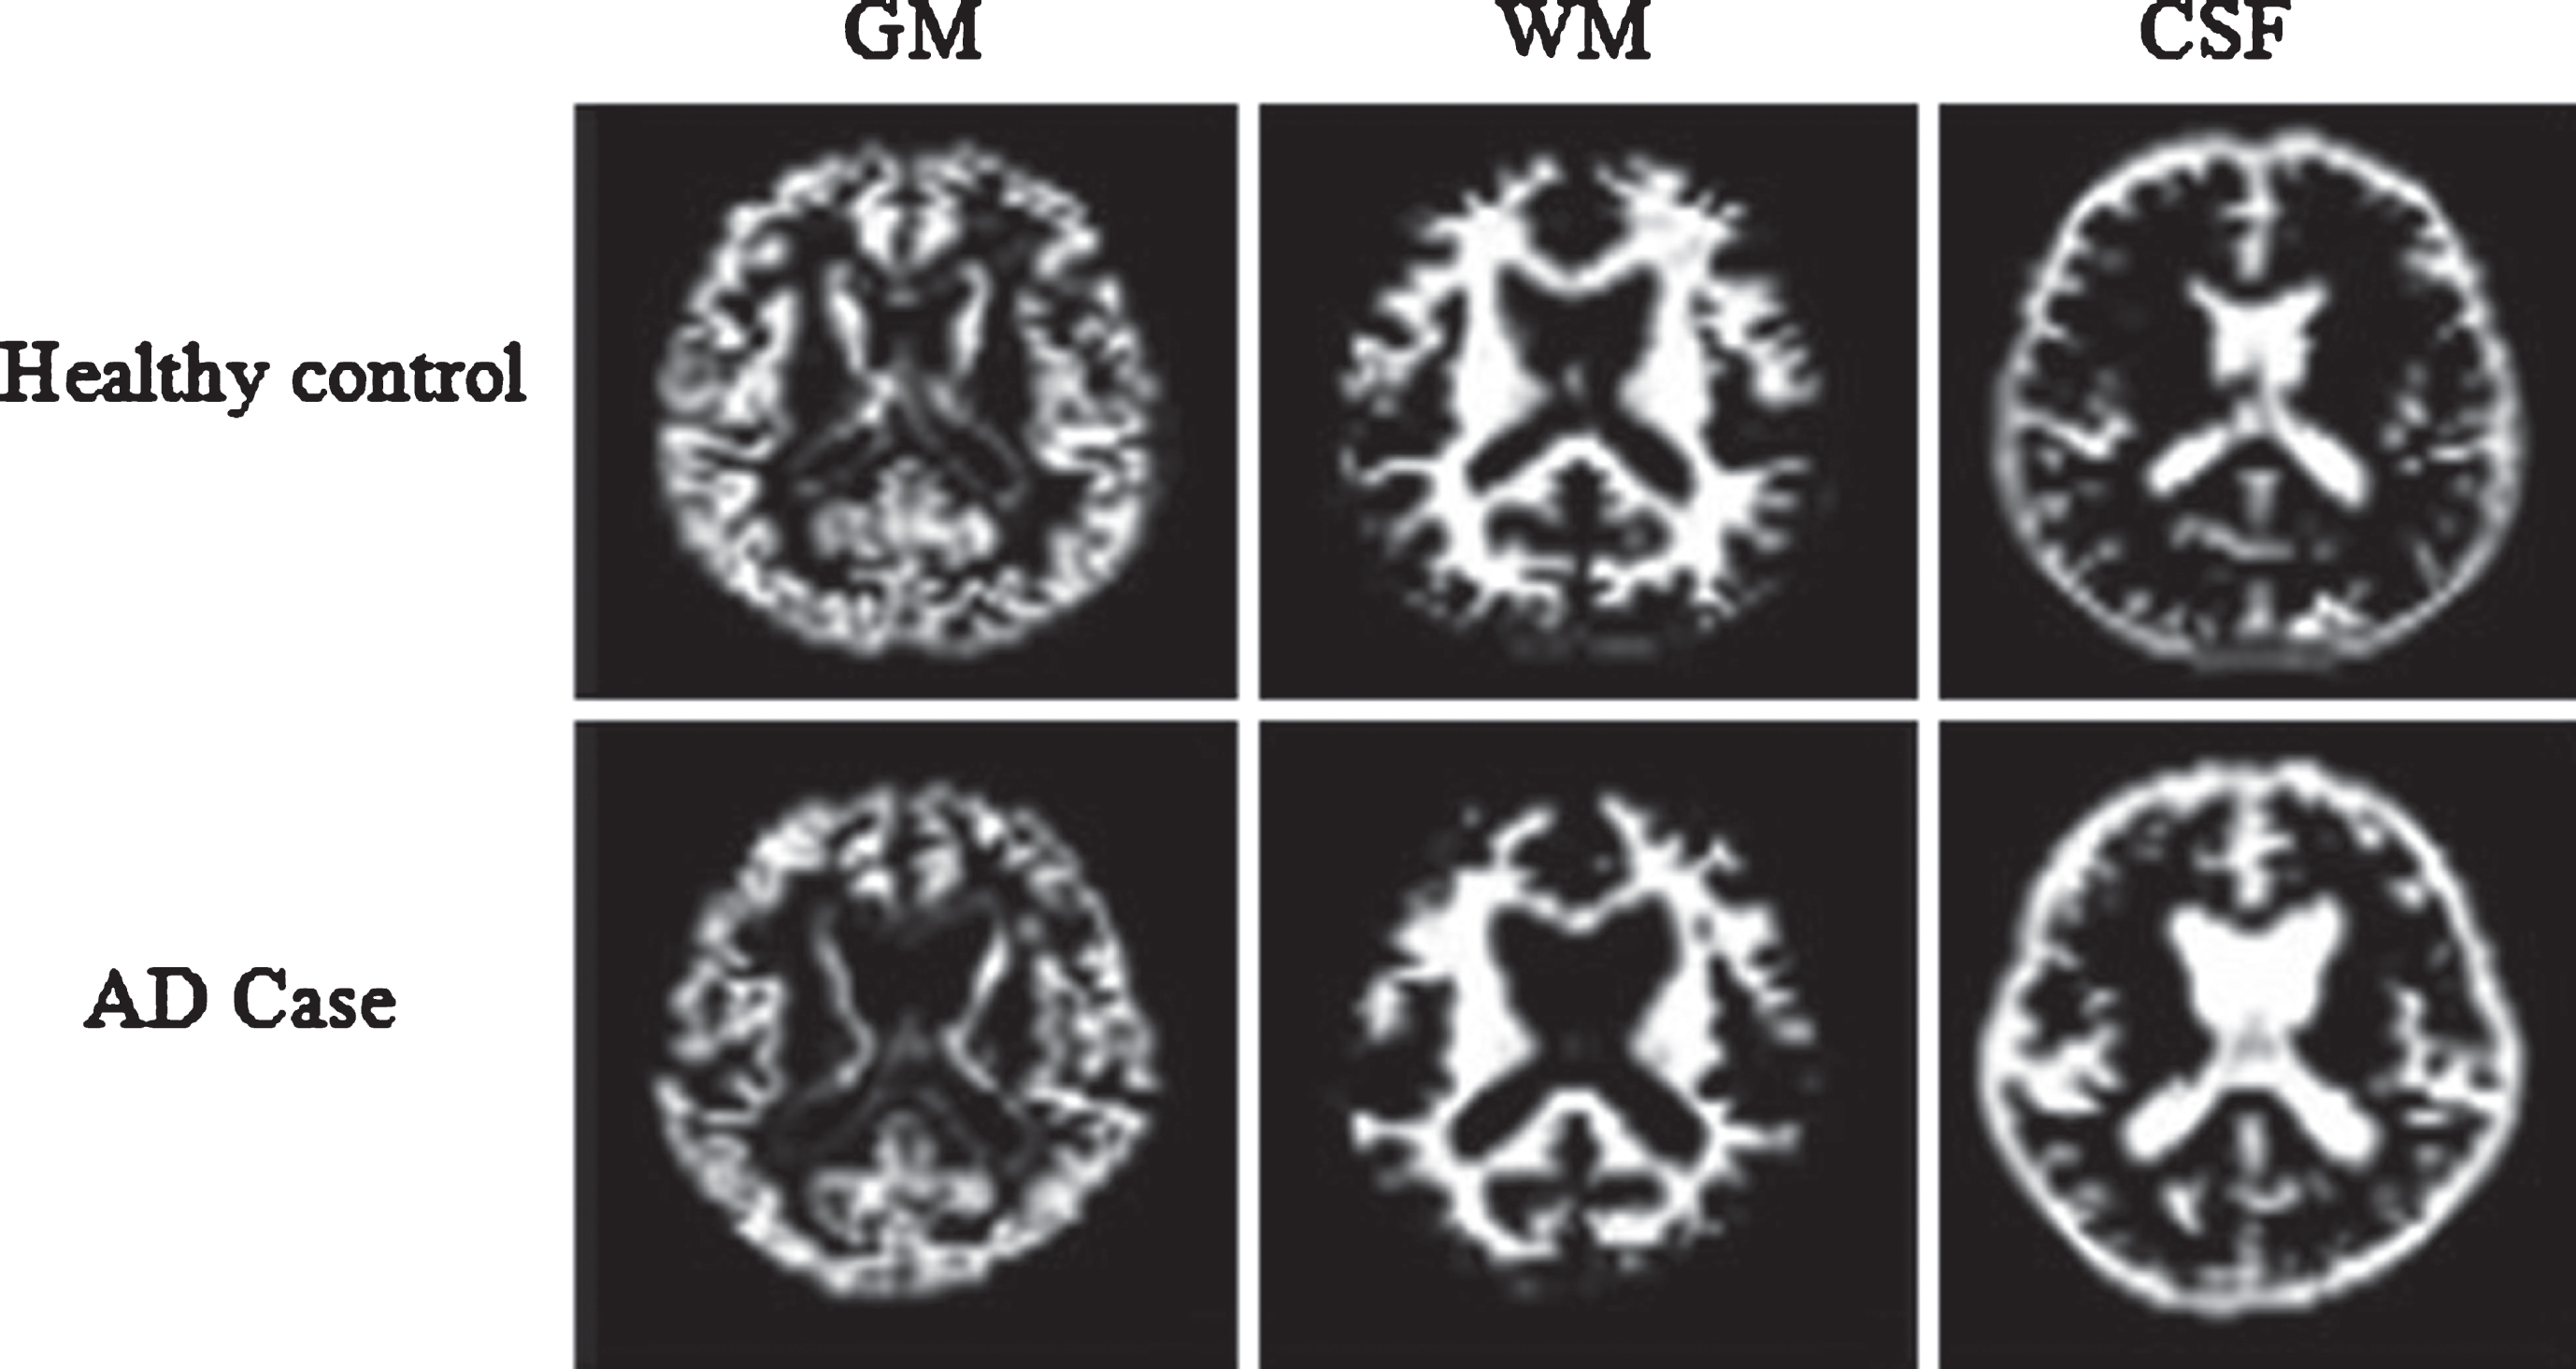 Segmentation results of a normal individual and an AD patient. AD, Alzheimer’s disease; GM, gray matter; WM, white matter; CSF, cerebrospinal fluid.